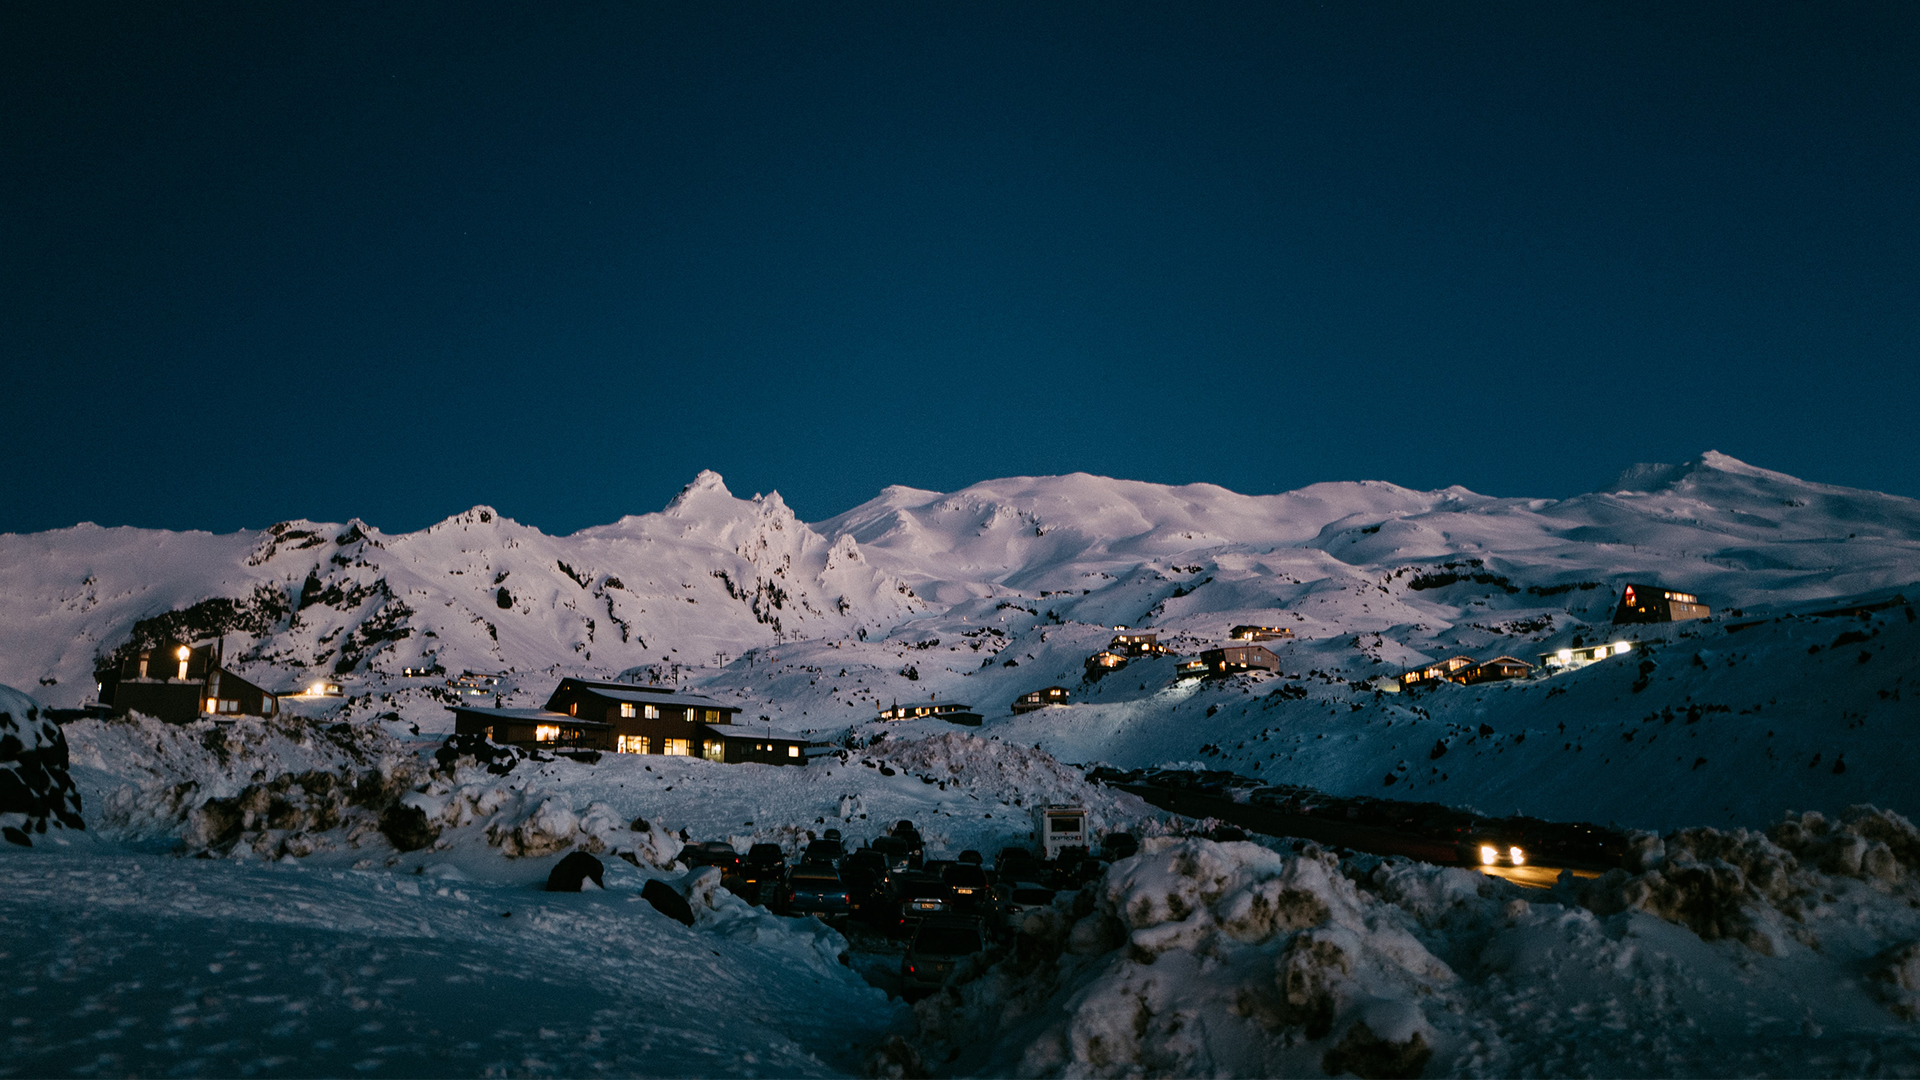 Homes with lights on scattered amongst snow covered mountains at night. 